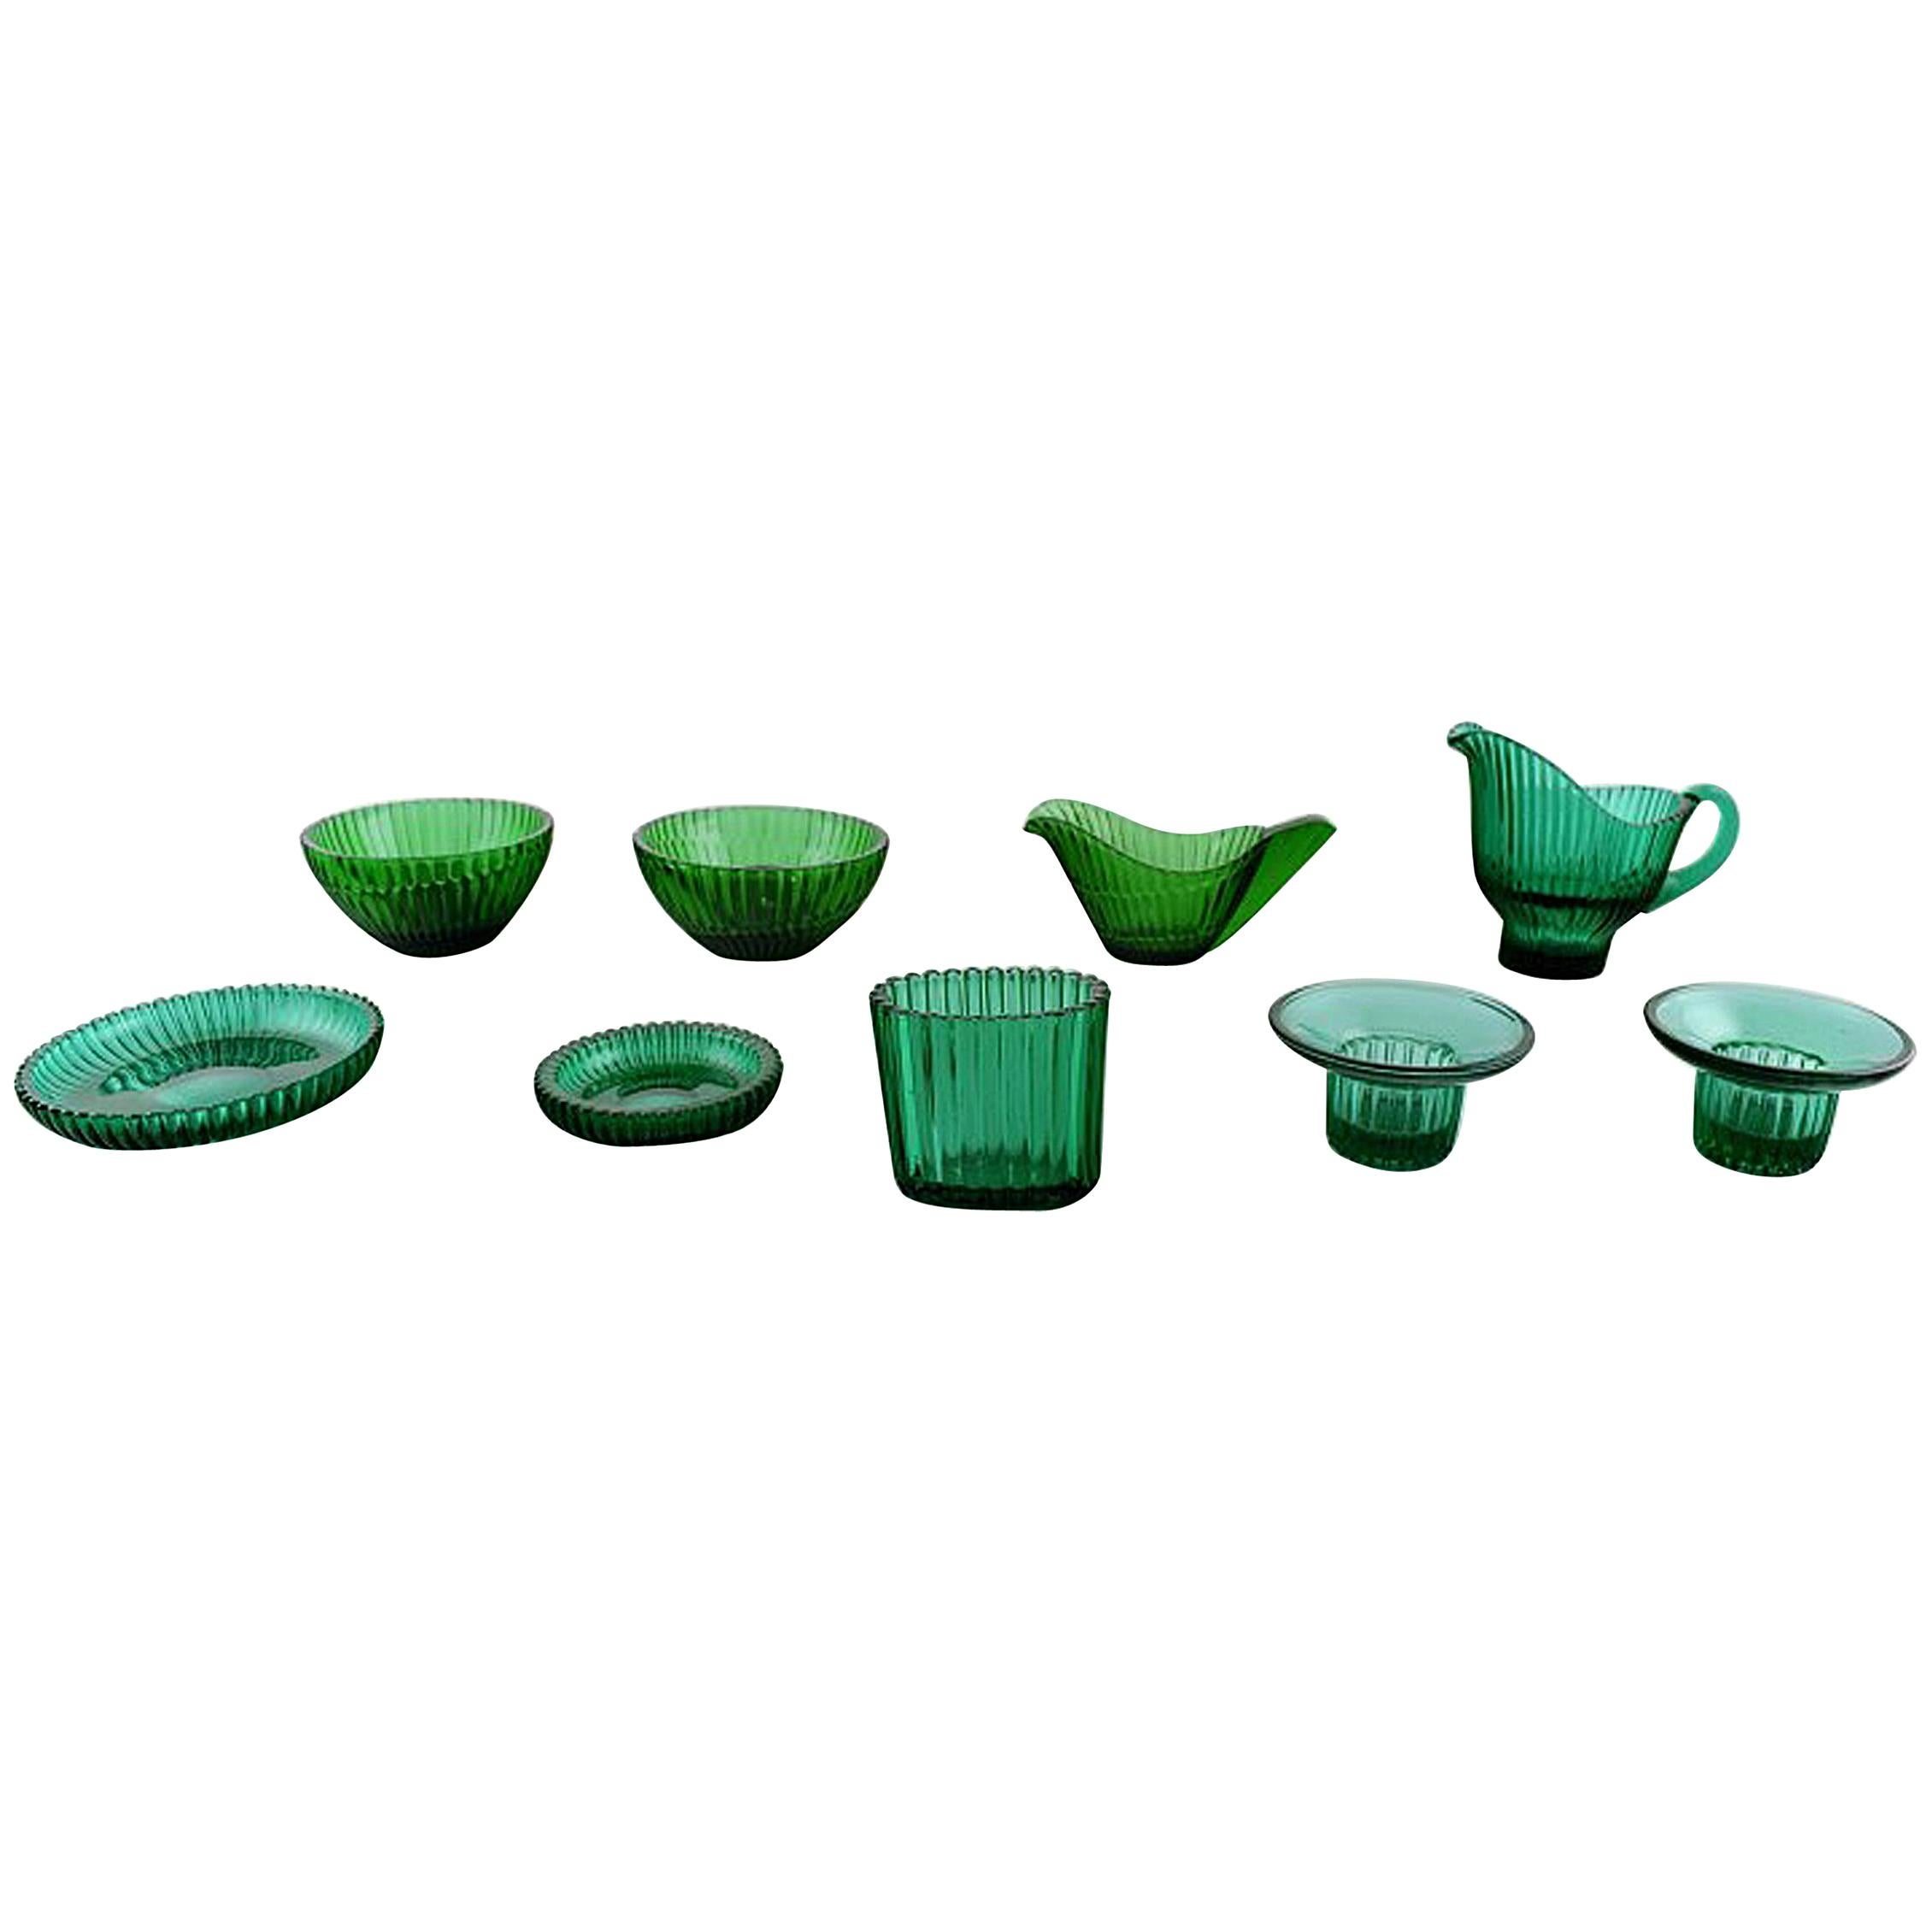 Arthur Percy for Nybro Sweden, Collection of Green Art Glass, 9 Pieces For Sale